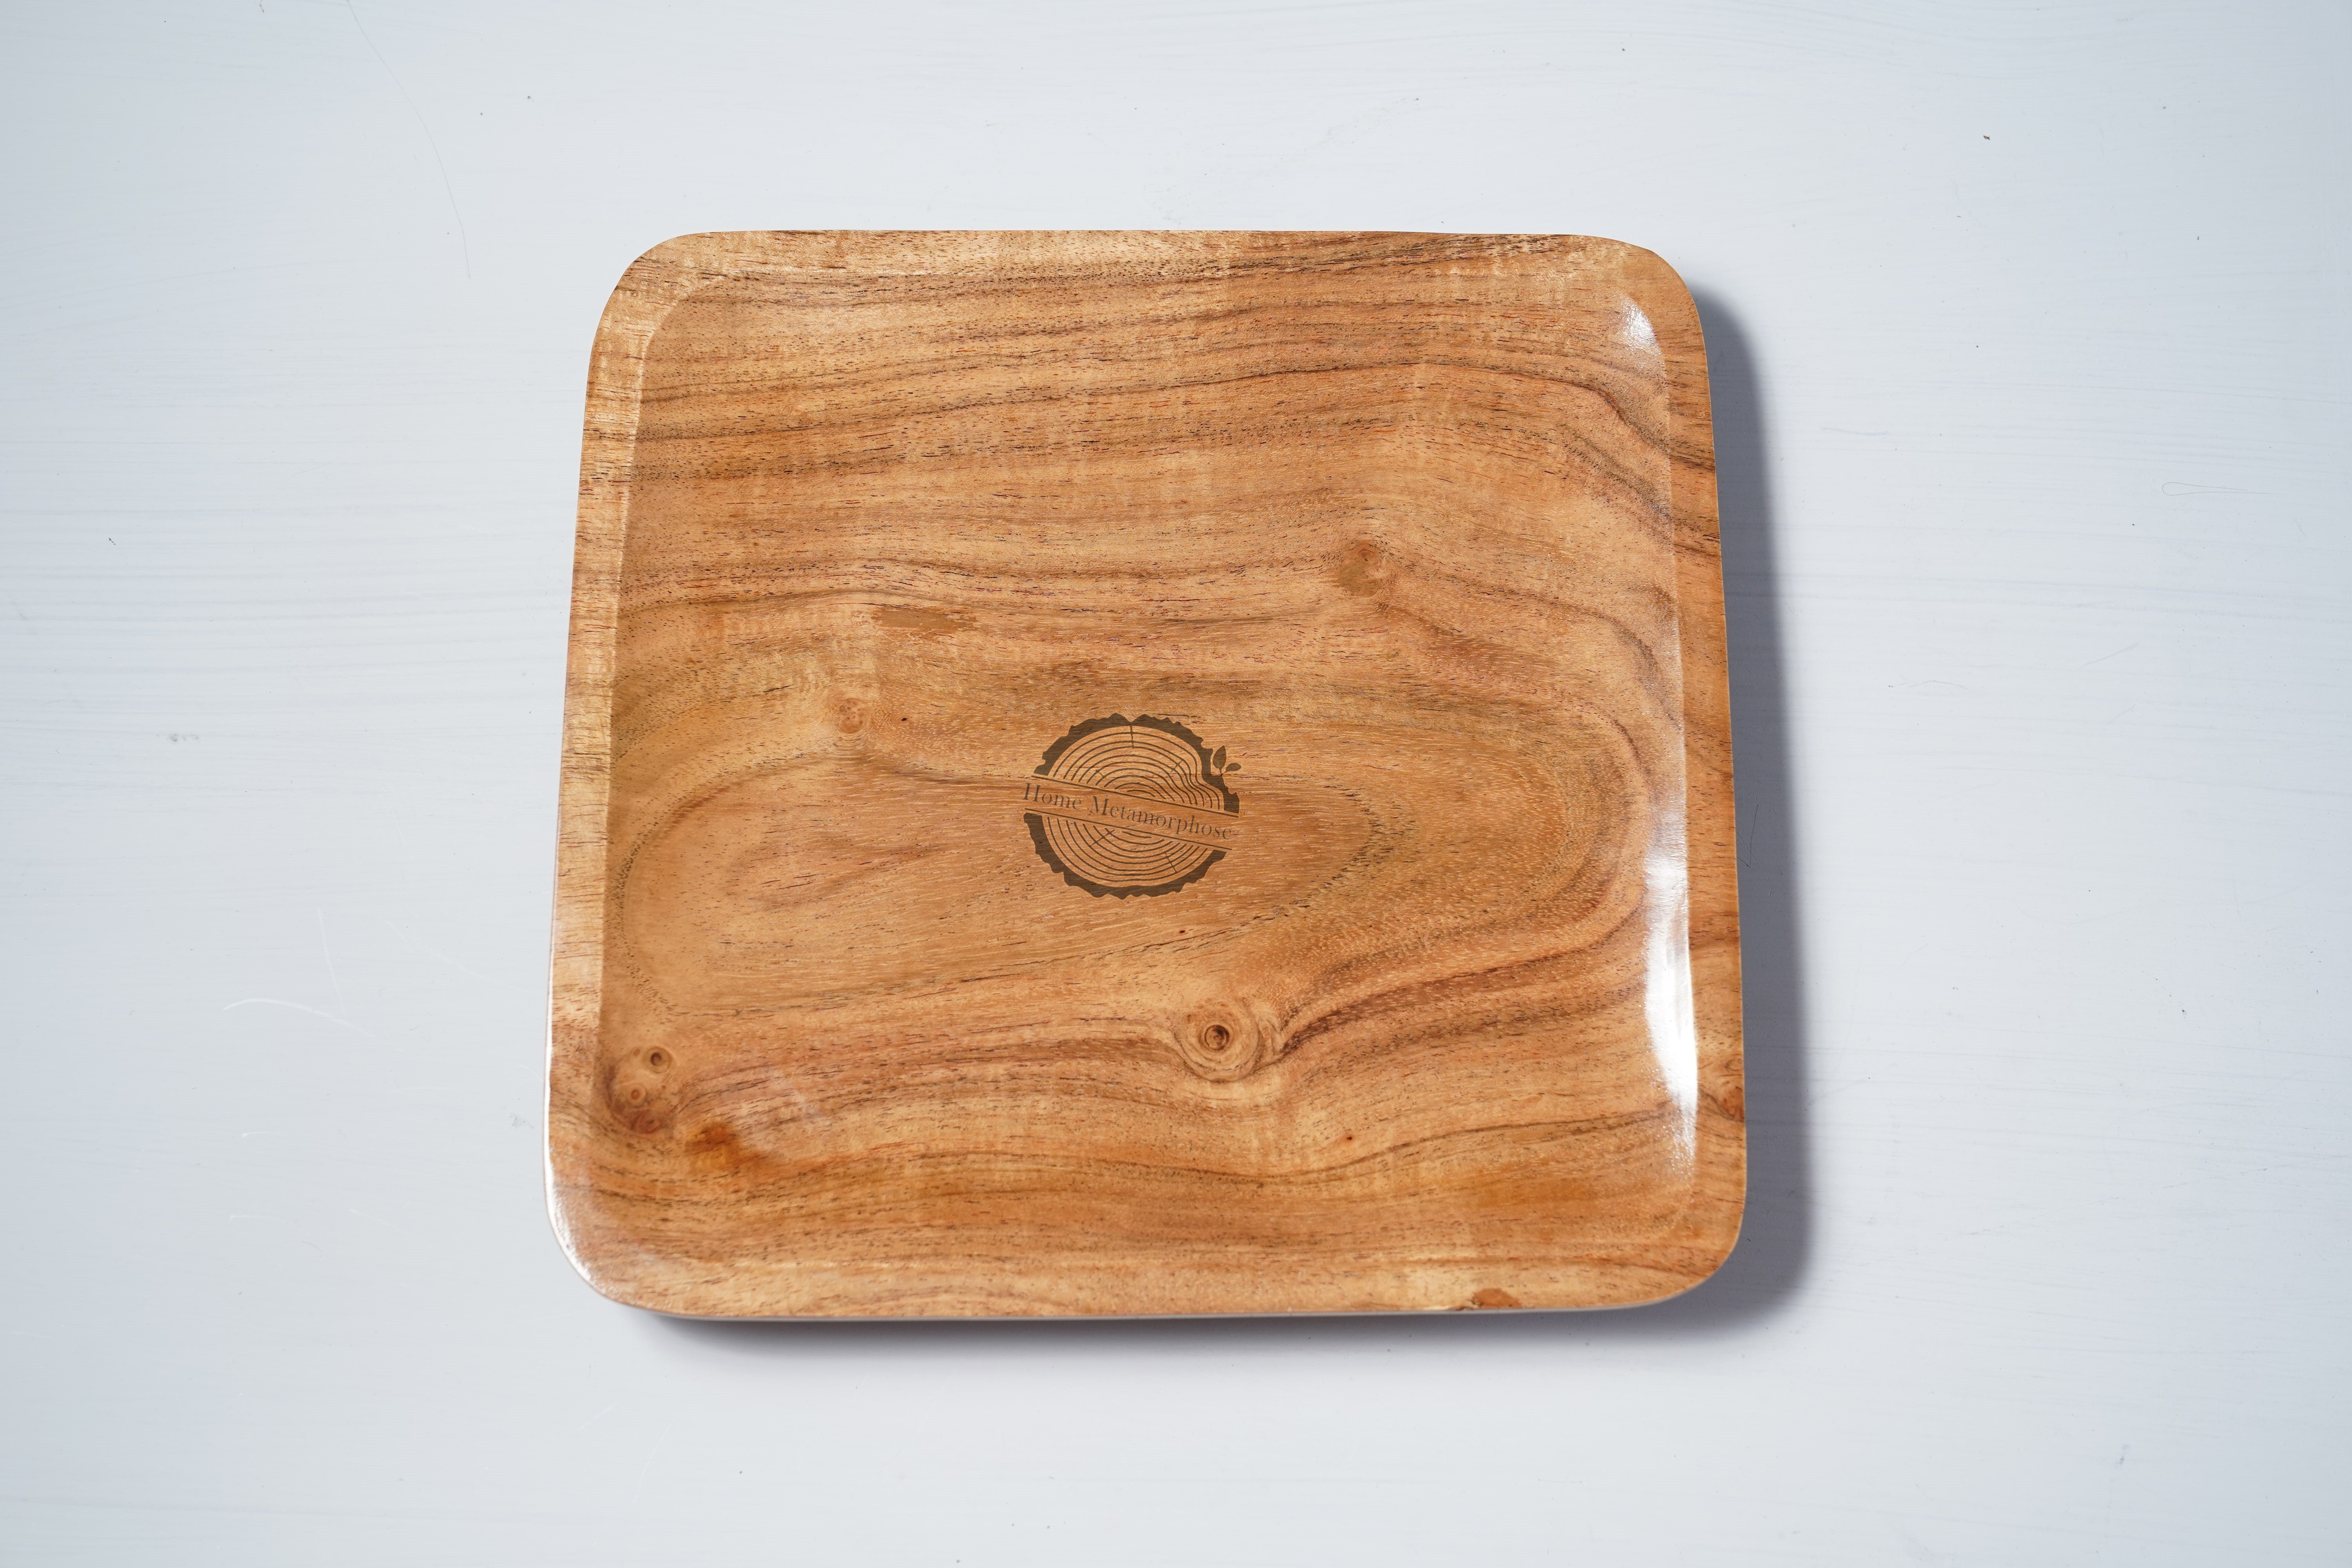 Wood Square Serving Tray, Set of 12 each 8 Inch Square Wood Serving Platter Wooden Serving Board, Square Acacia Wood Plates for Charcuterie, Fruit, Bread Square Platter